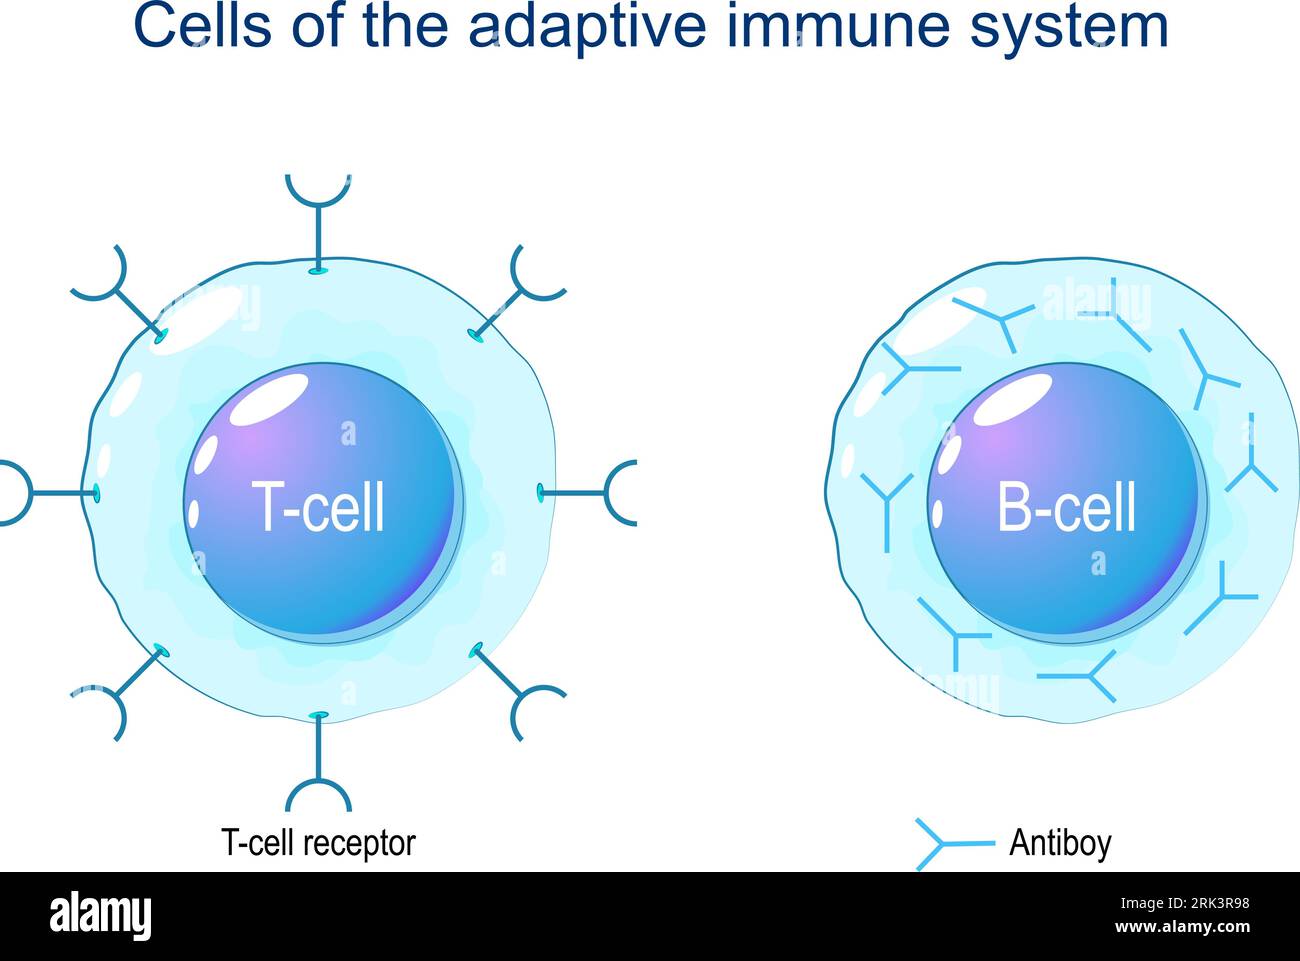 T-cell and B-cell. Cells of Adaptive immune system. immune response and lymphocytes. Vector illustration on white background. Stock Vector